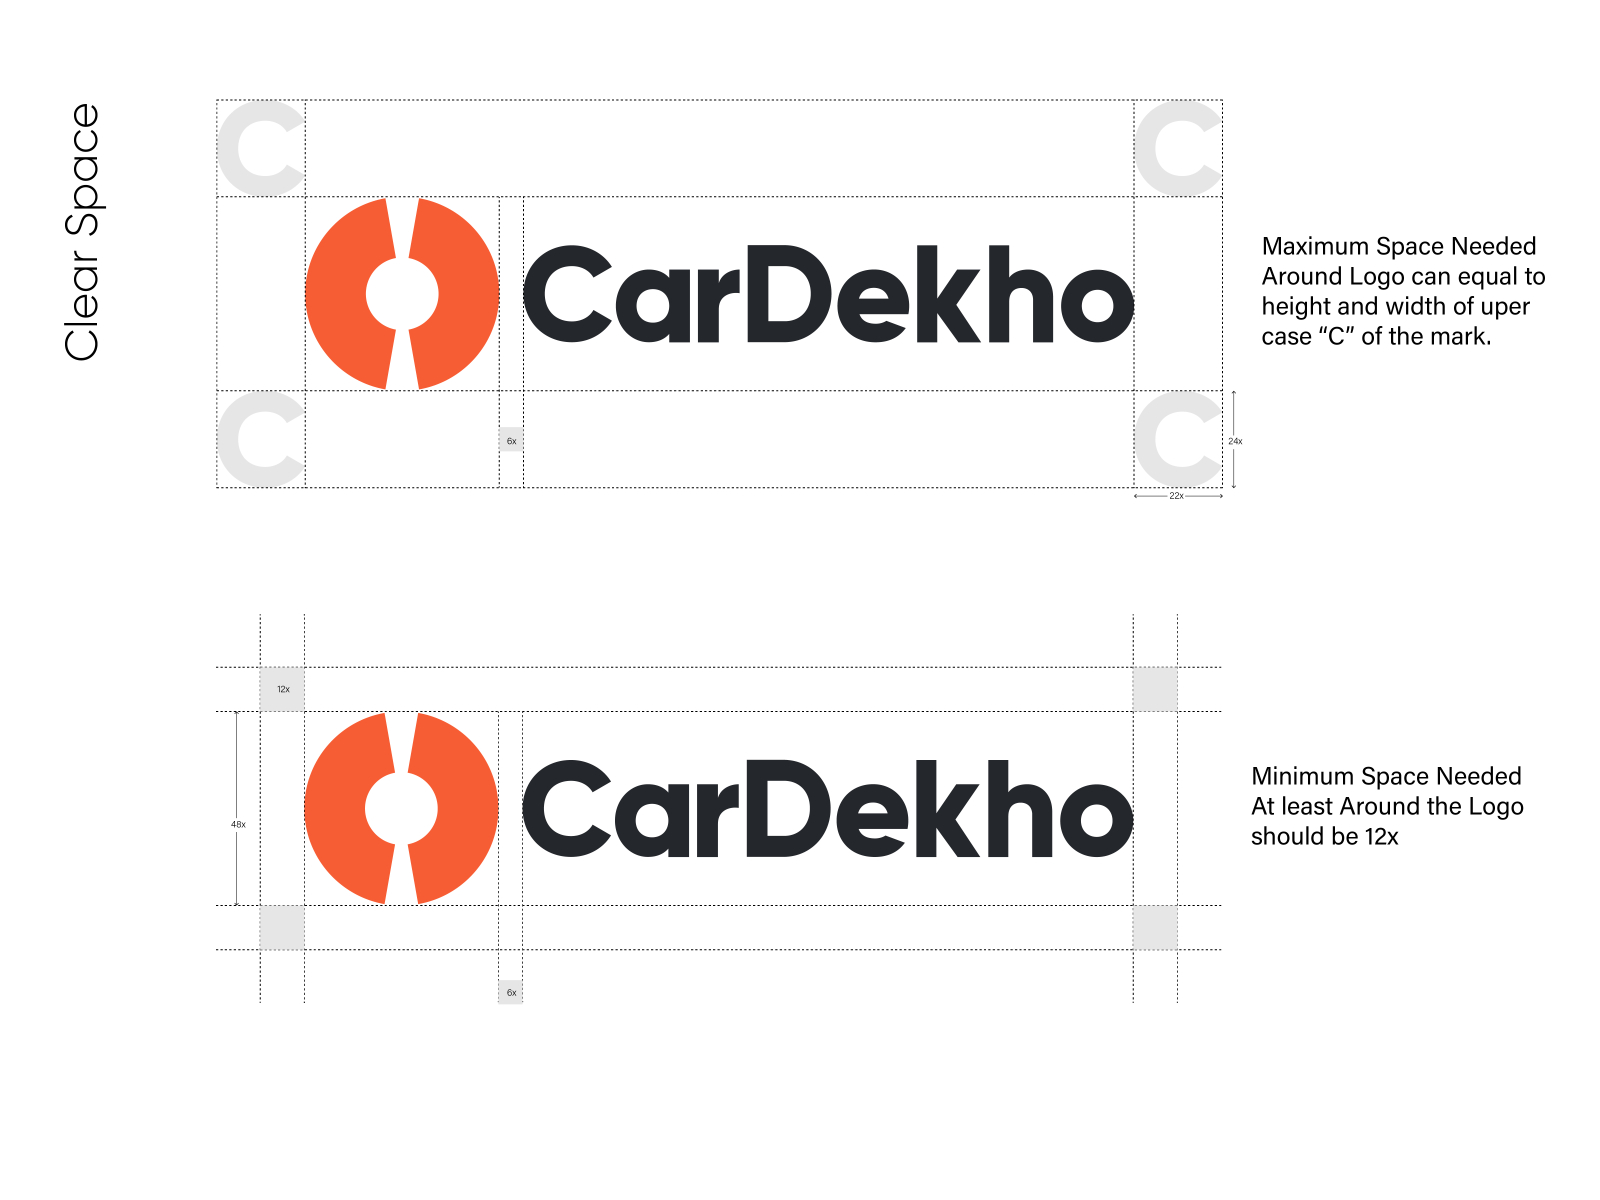 CarDekho appoints Sharad Saxena as CEO of Used Car Business